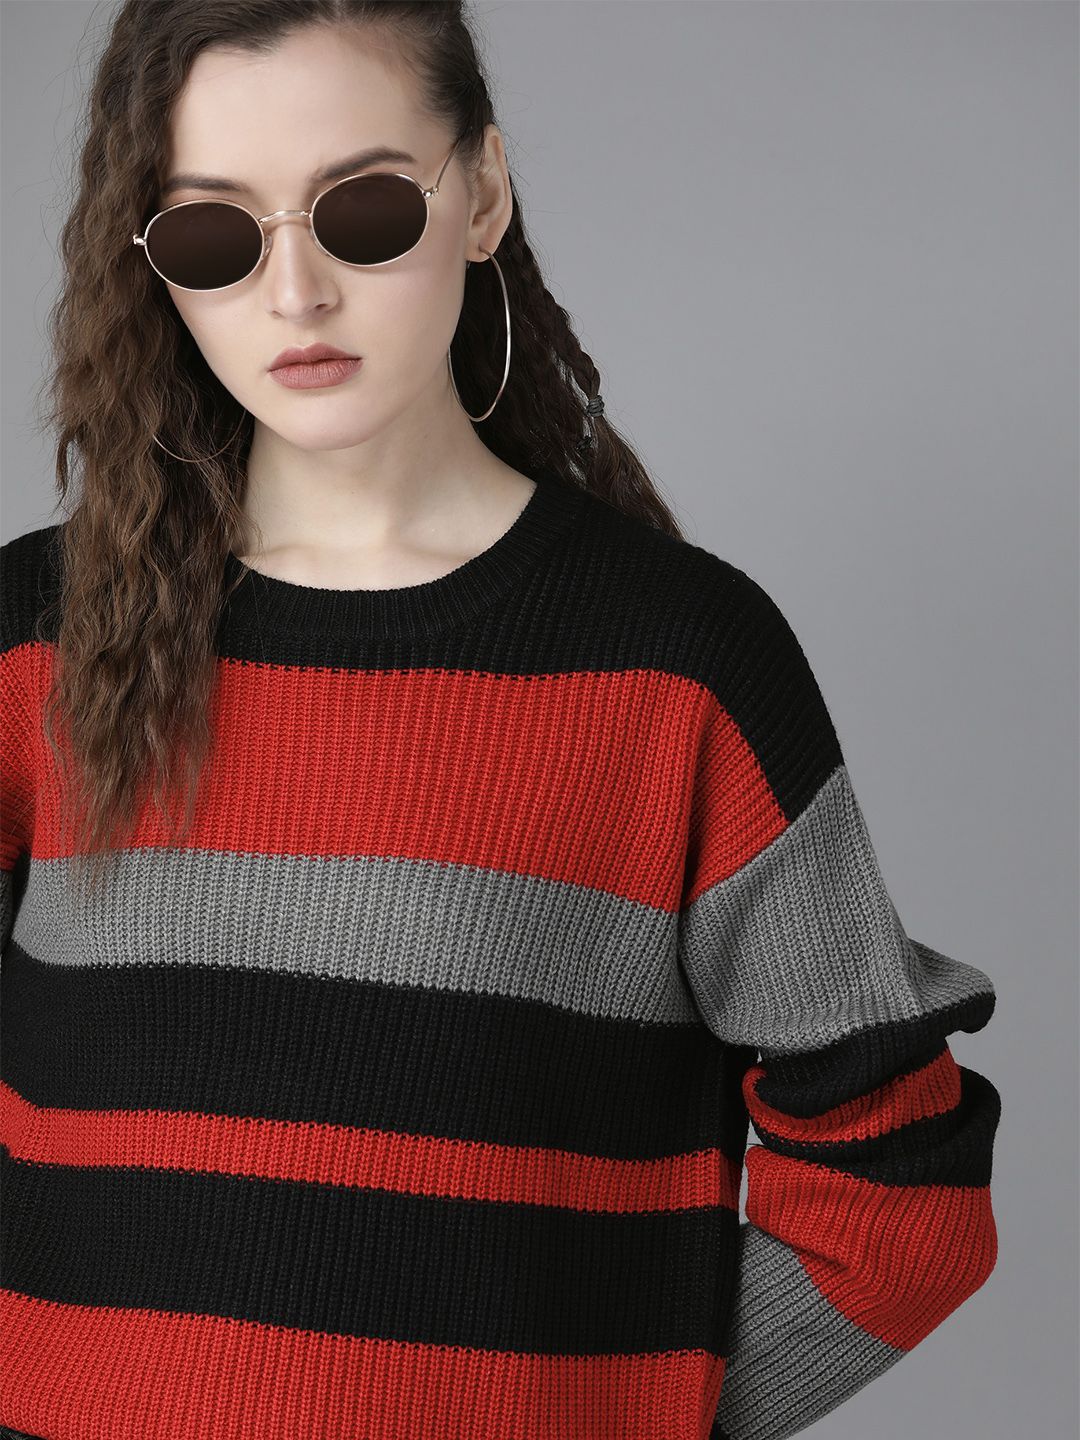 Roadster Women Red & Black Striped Pullover Sweater Price in India